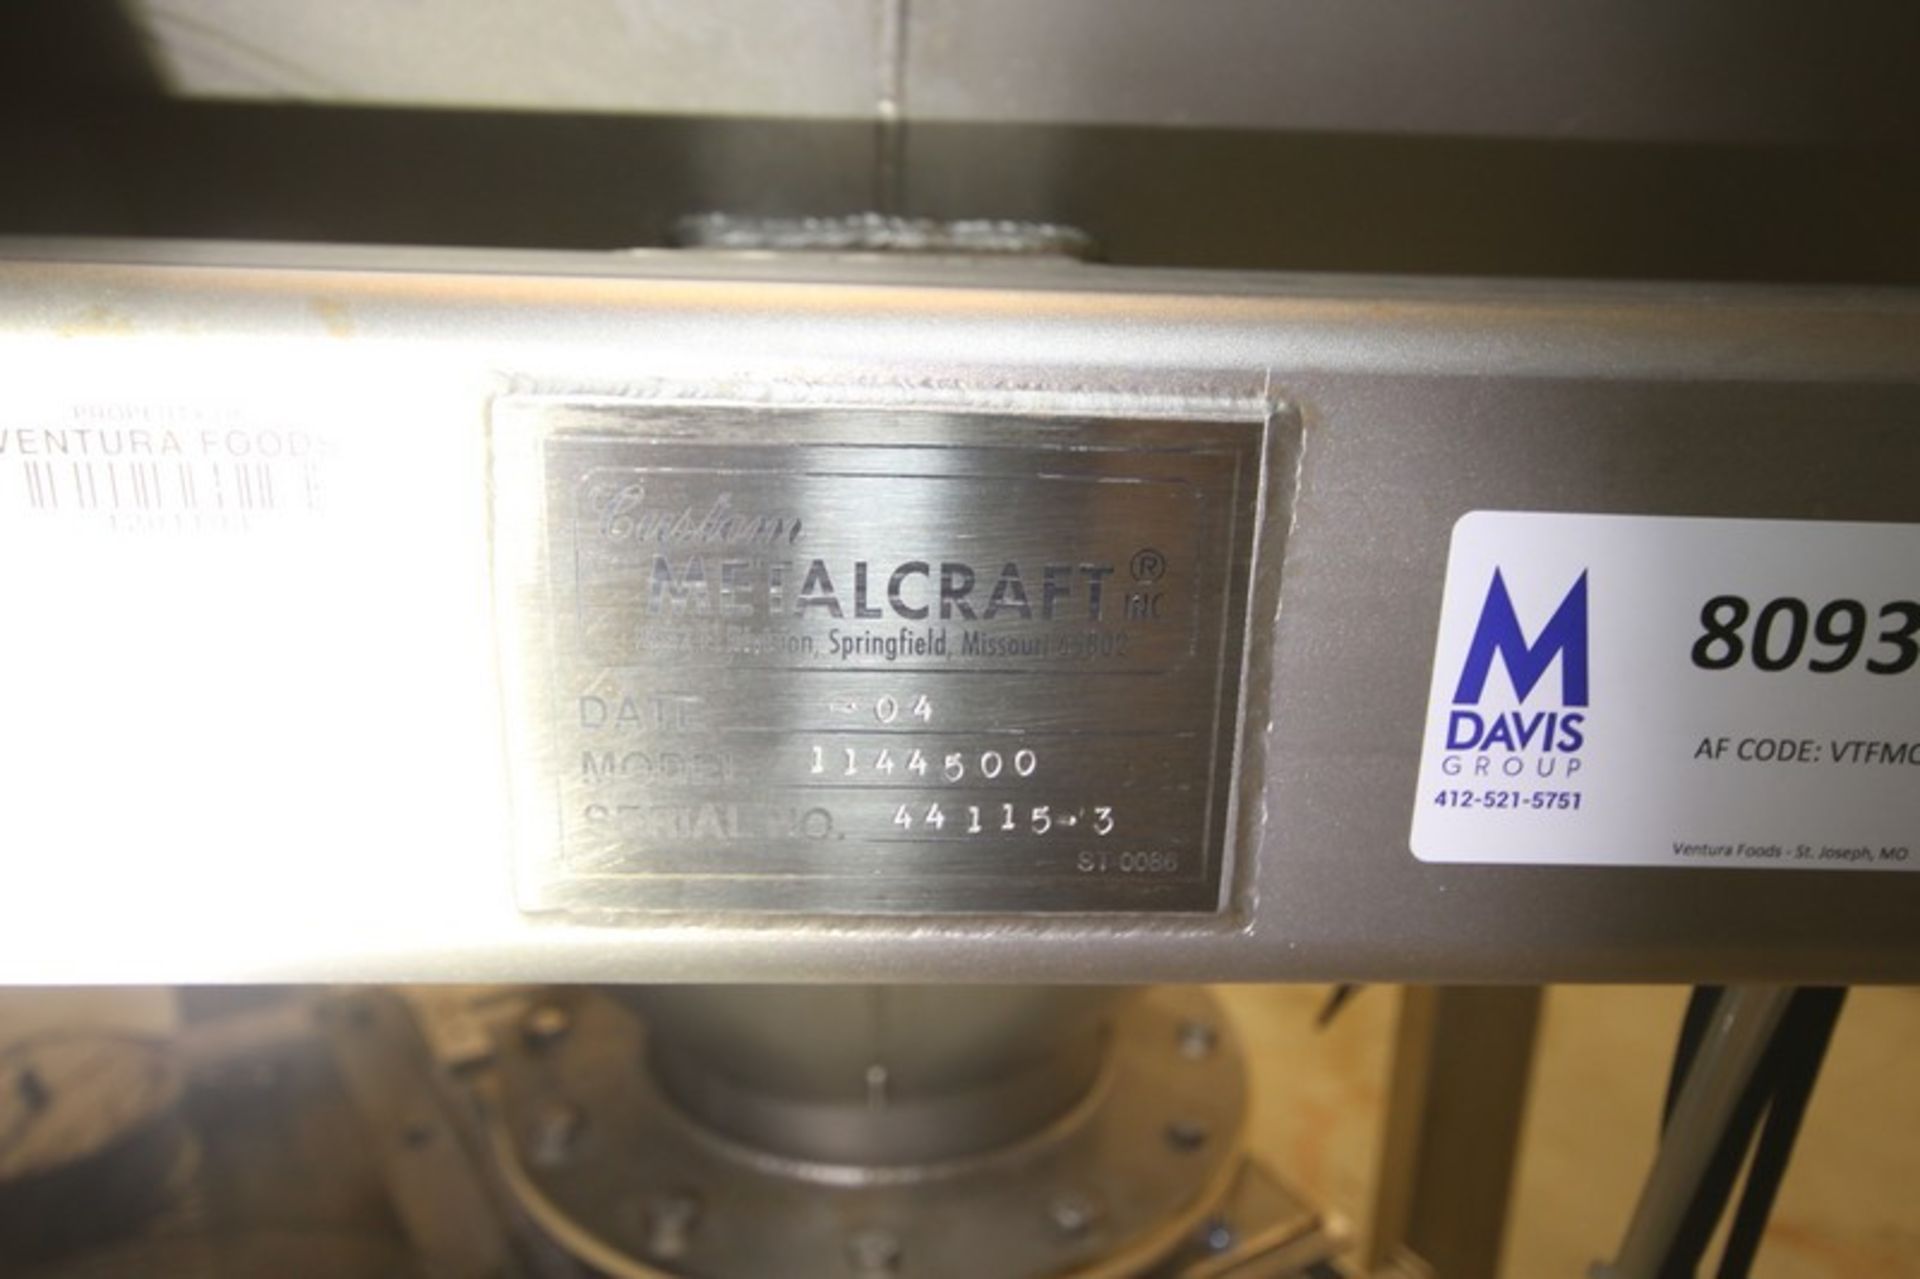 Metalcraft S/S Powder Hopper, Model 1144500,SN 44115-3, with 10" Top Connection with Pneumatic Power - Image 7 of 7